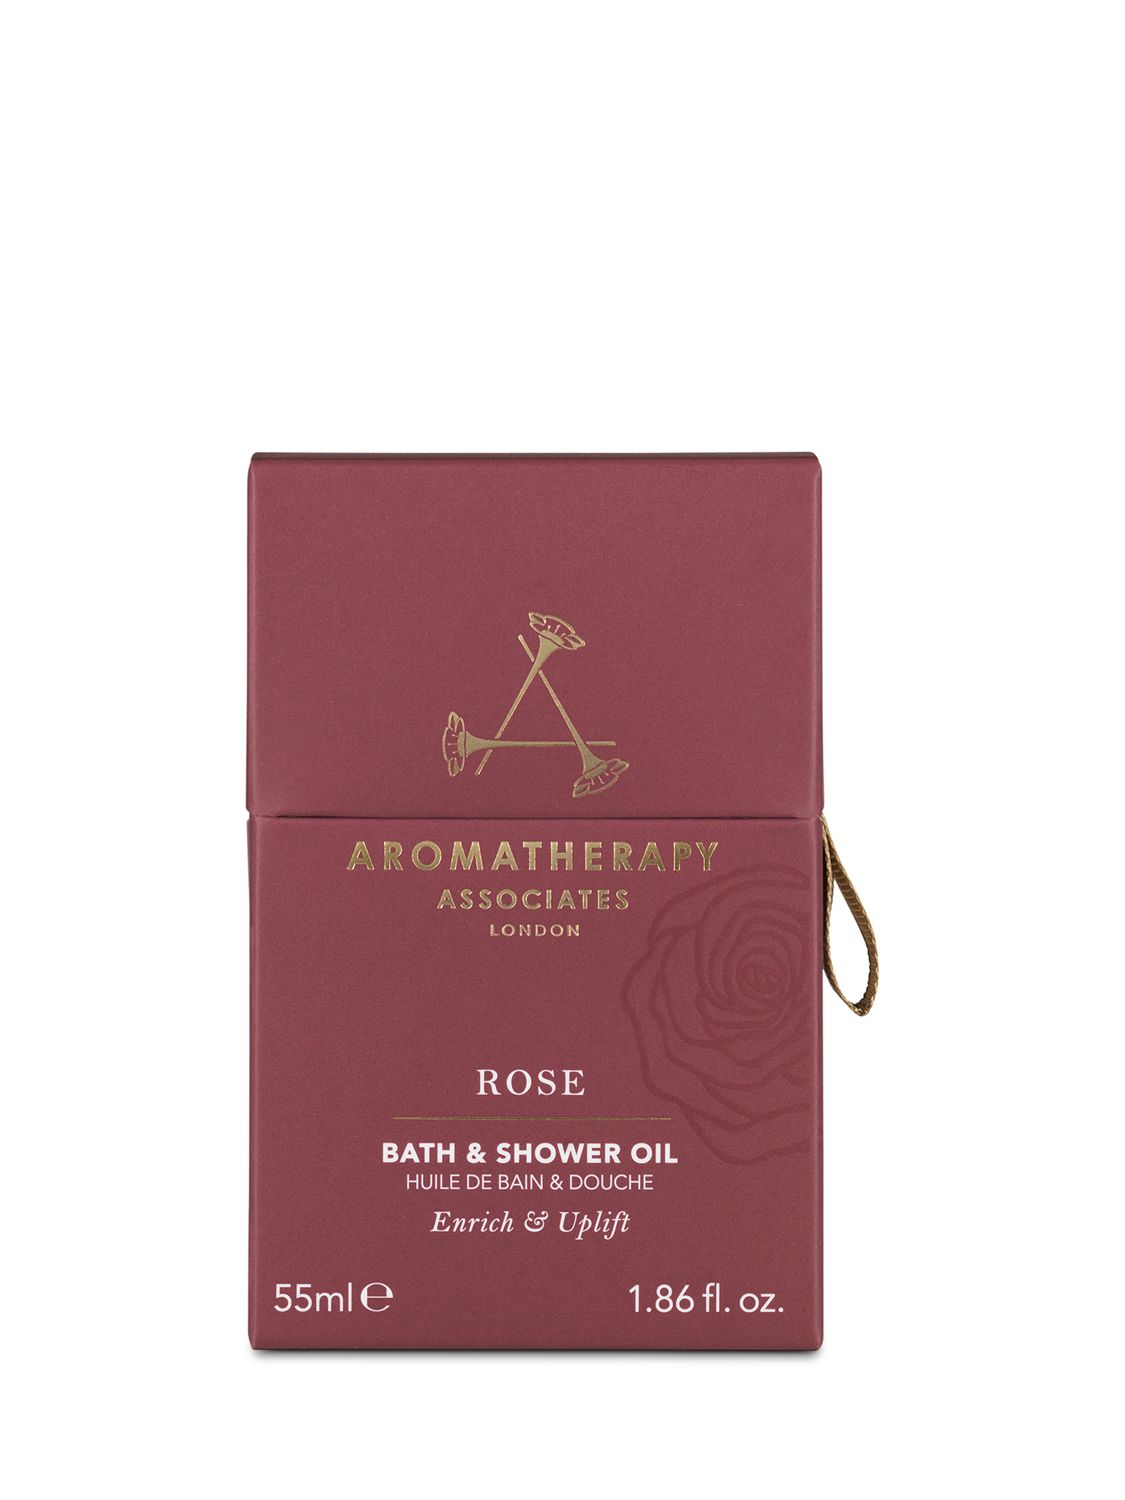 Aromatherapy Associates Rose Bath and Shower Oil, 55ml